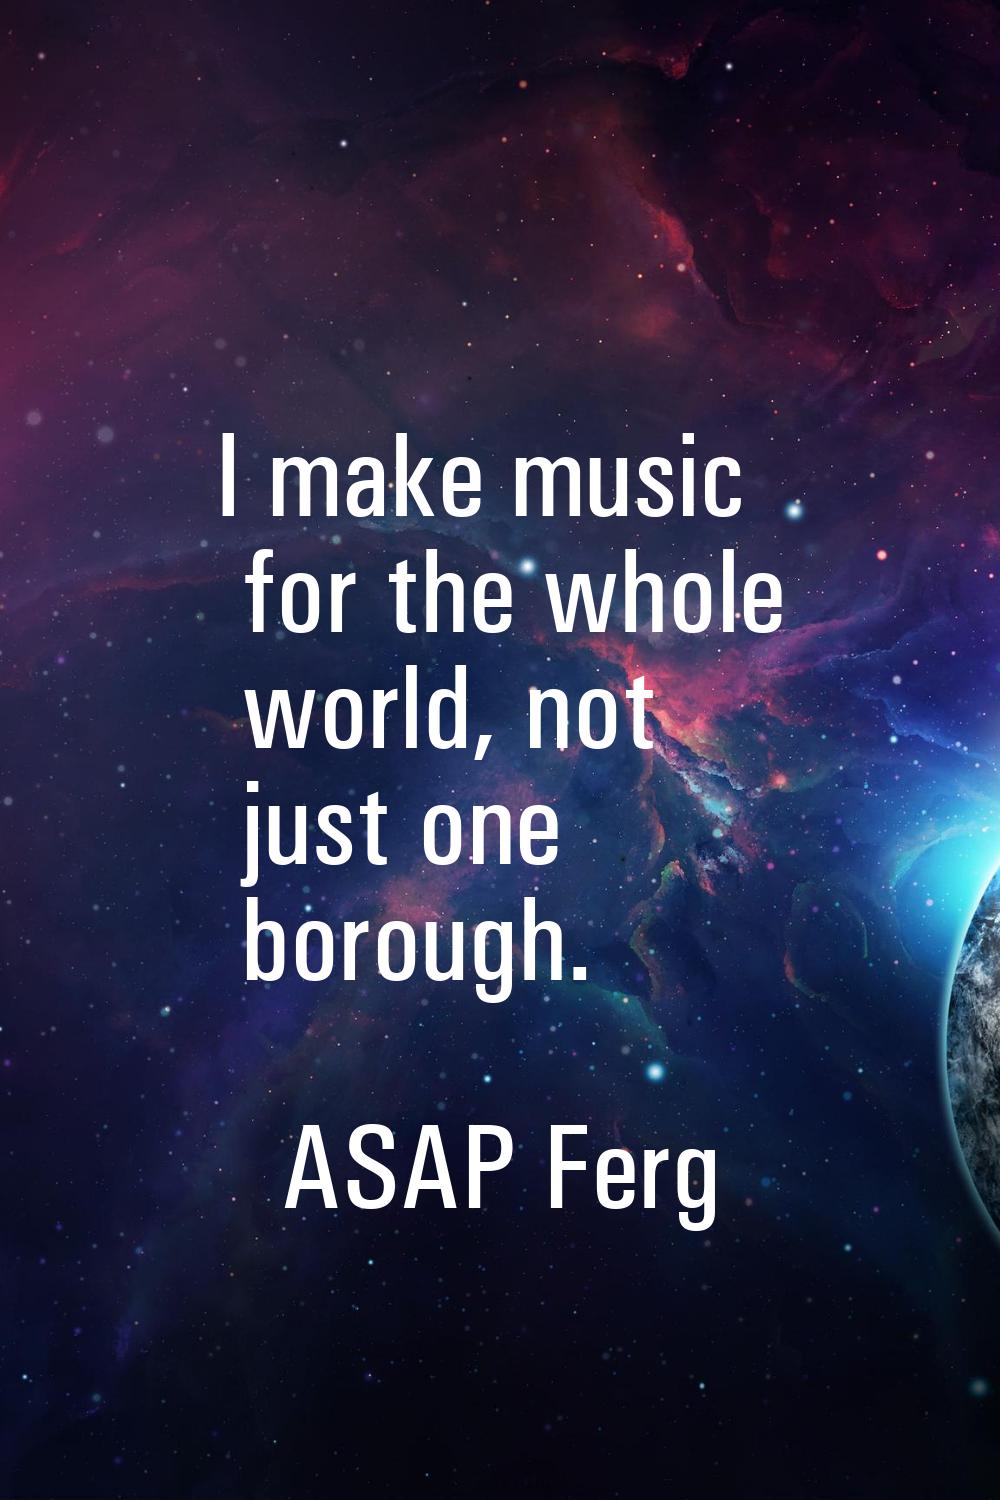 I make music for the whole world, not just one borough.